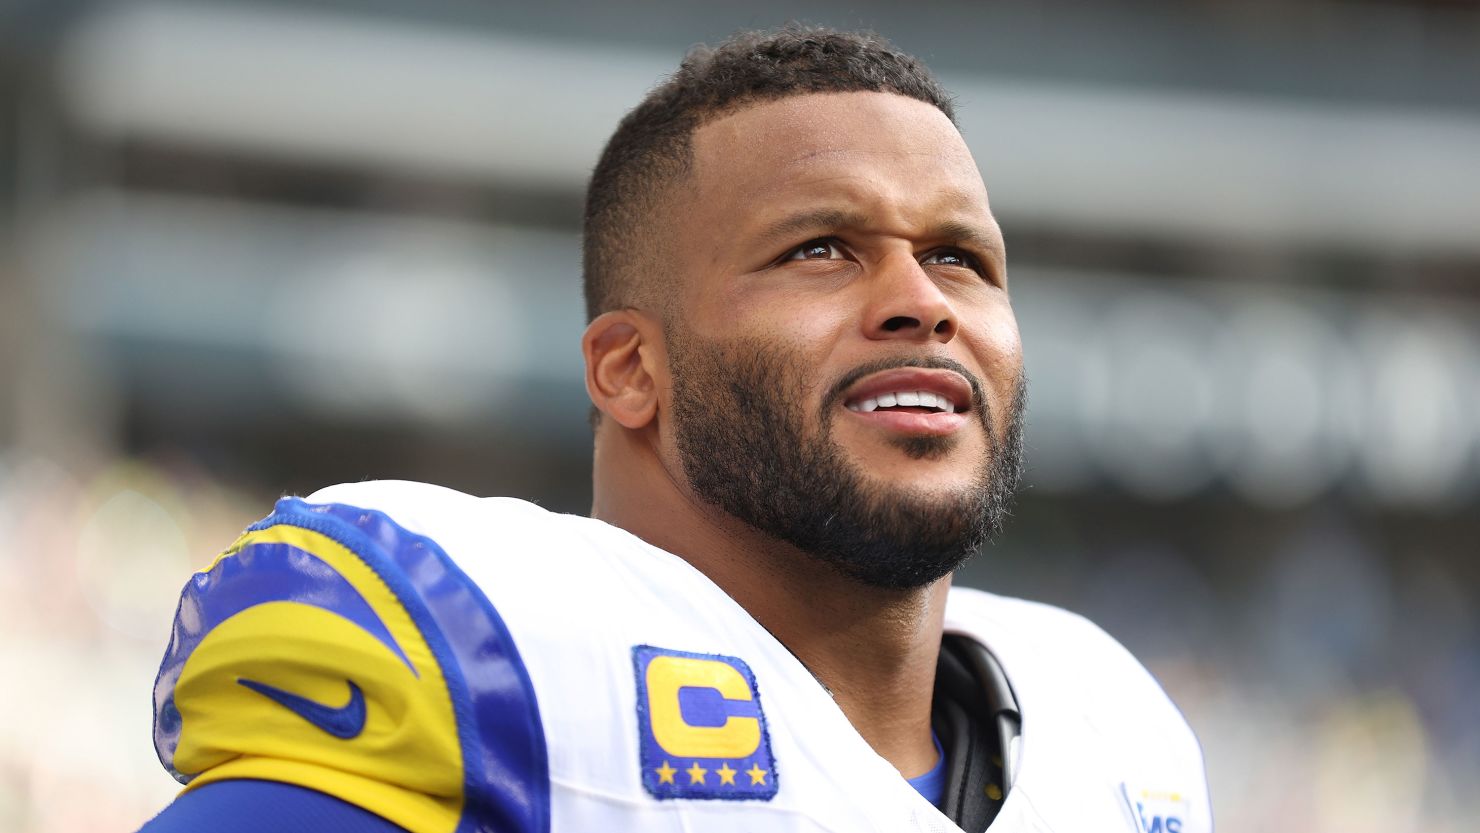 Aaron Donald, one of the NFL's most feared defensive players, announced his retirement on Friday.